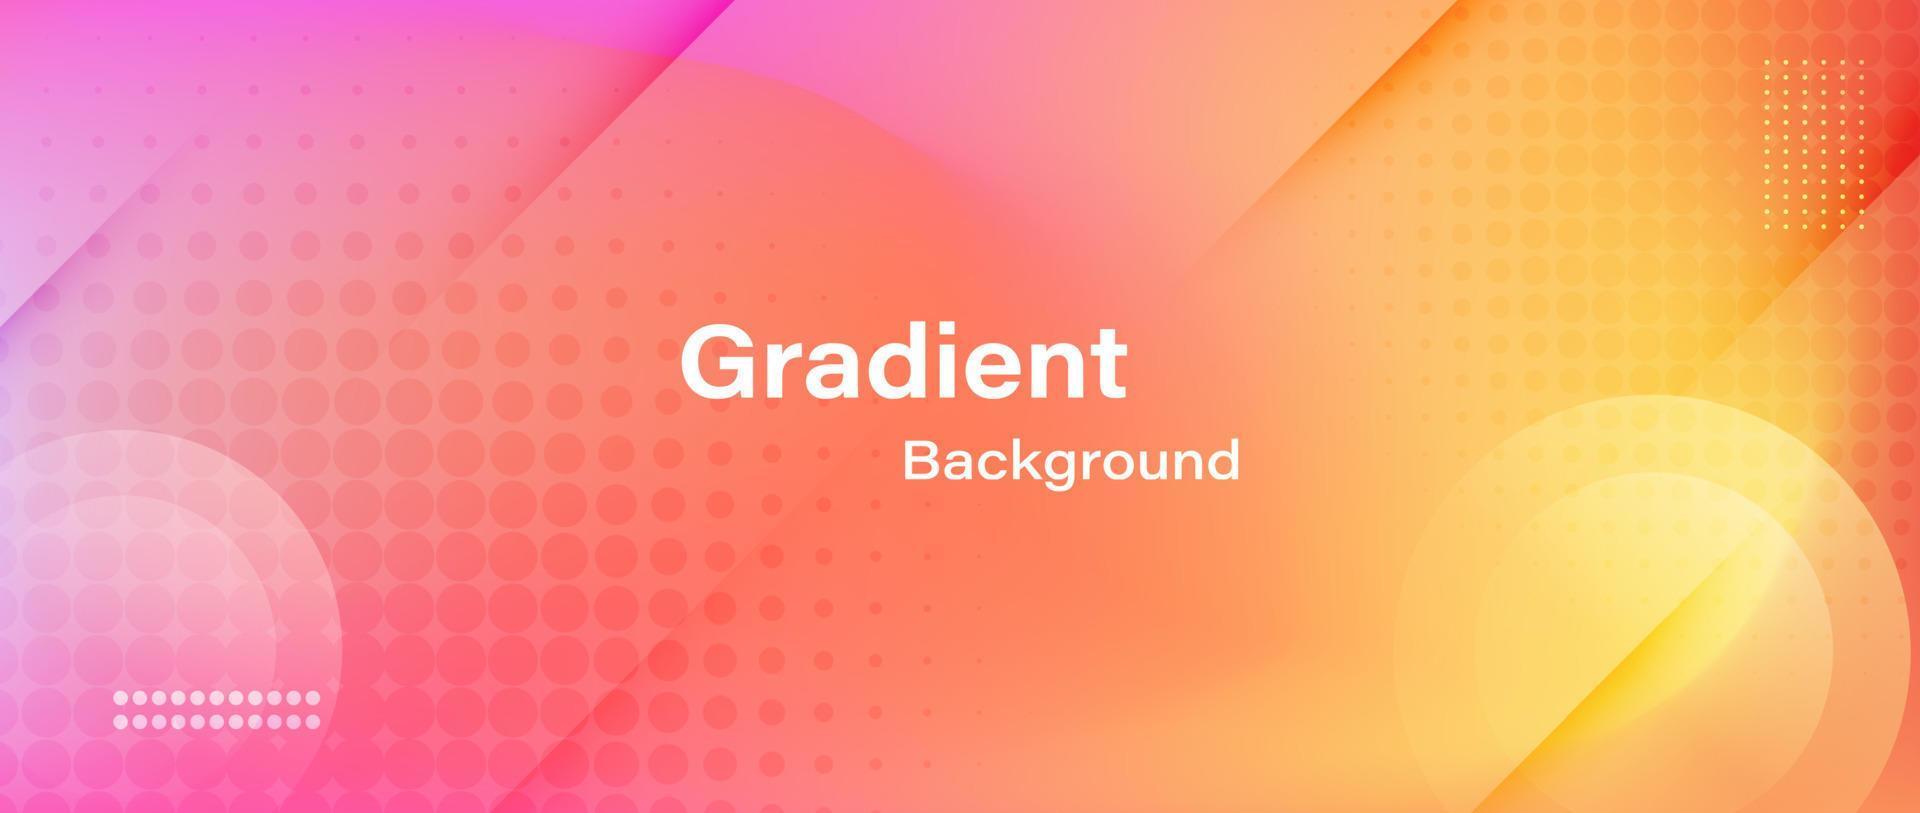 Abstract blurred gradient background with grainy texture vector